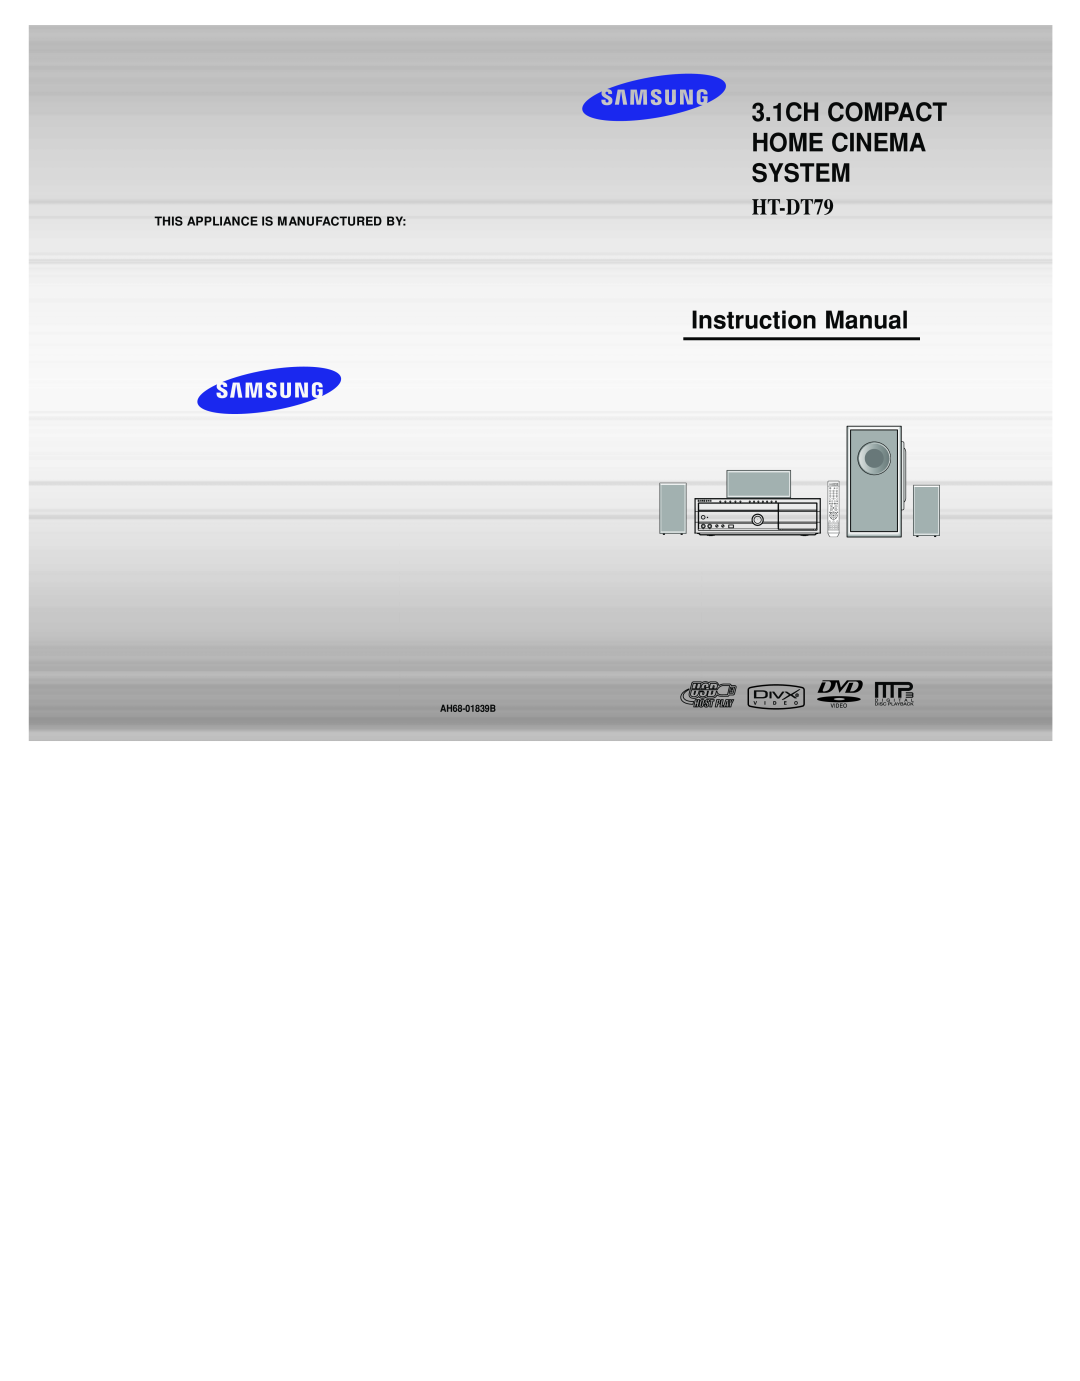 Samsung HT-DT79 instruction manual 3.1CH COMPACT HOME CINEMA SYSTEM, This Appliance Is Manufactured By 